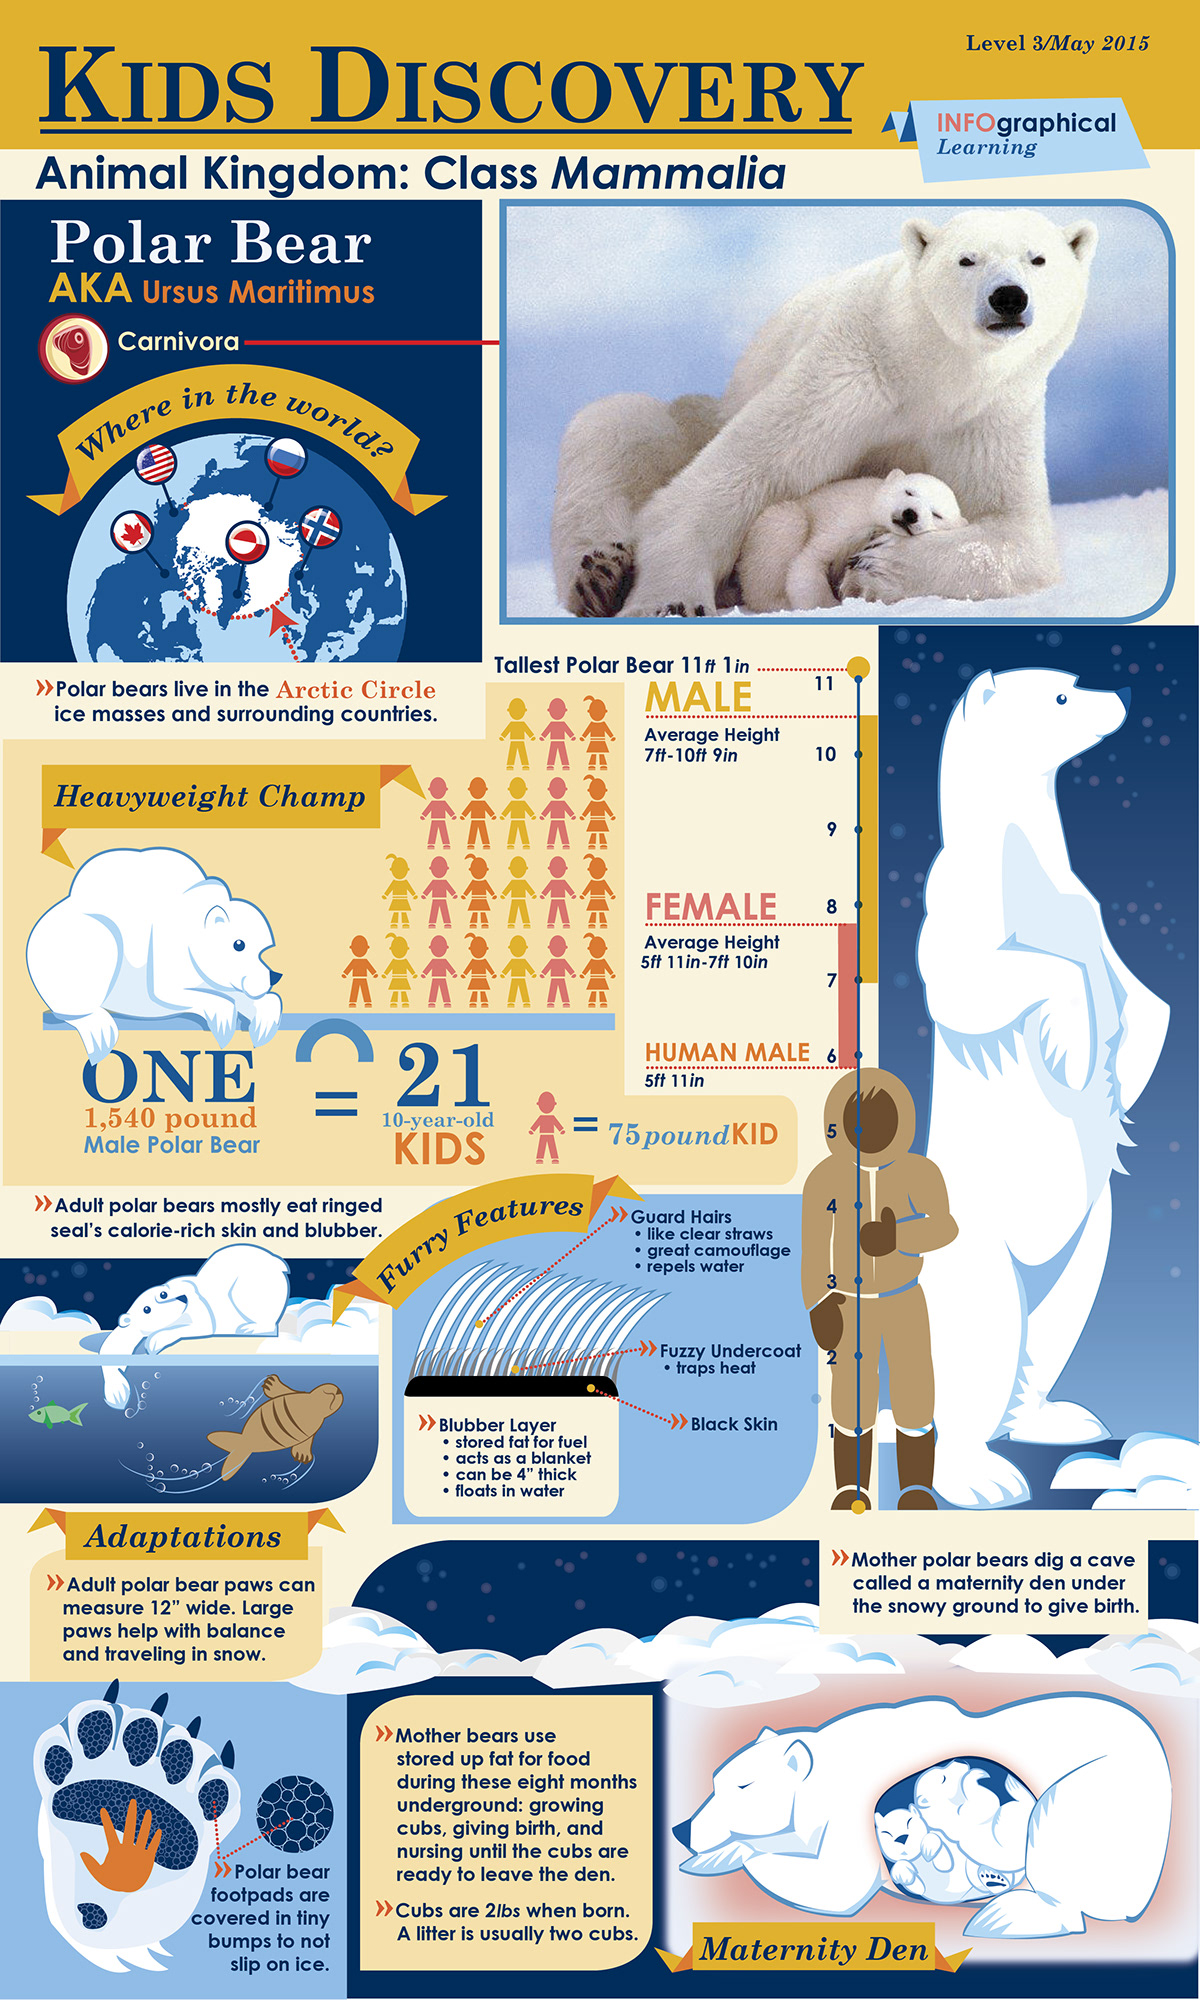 infographic science children educational